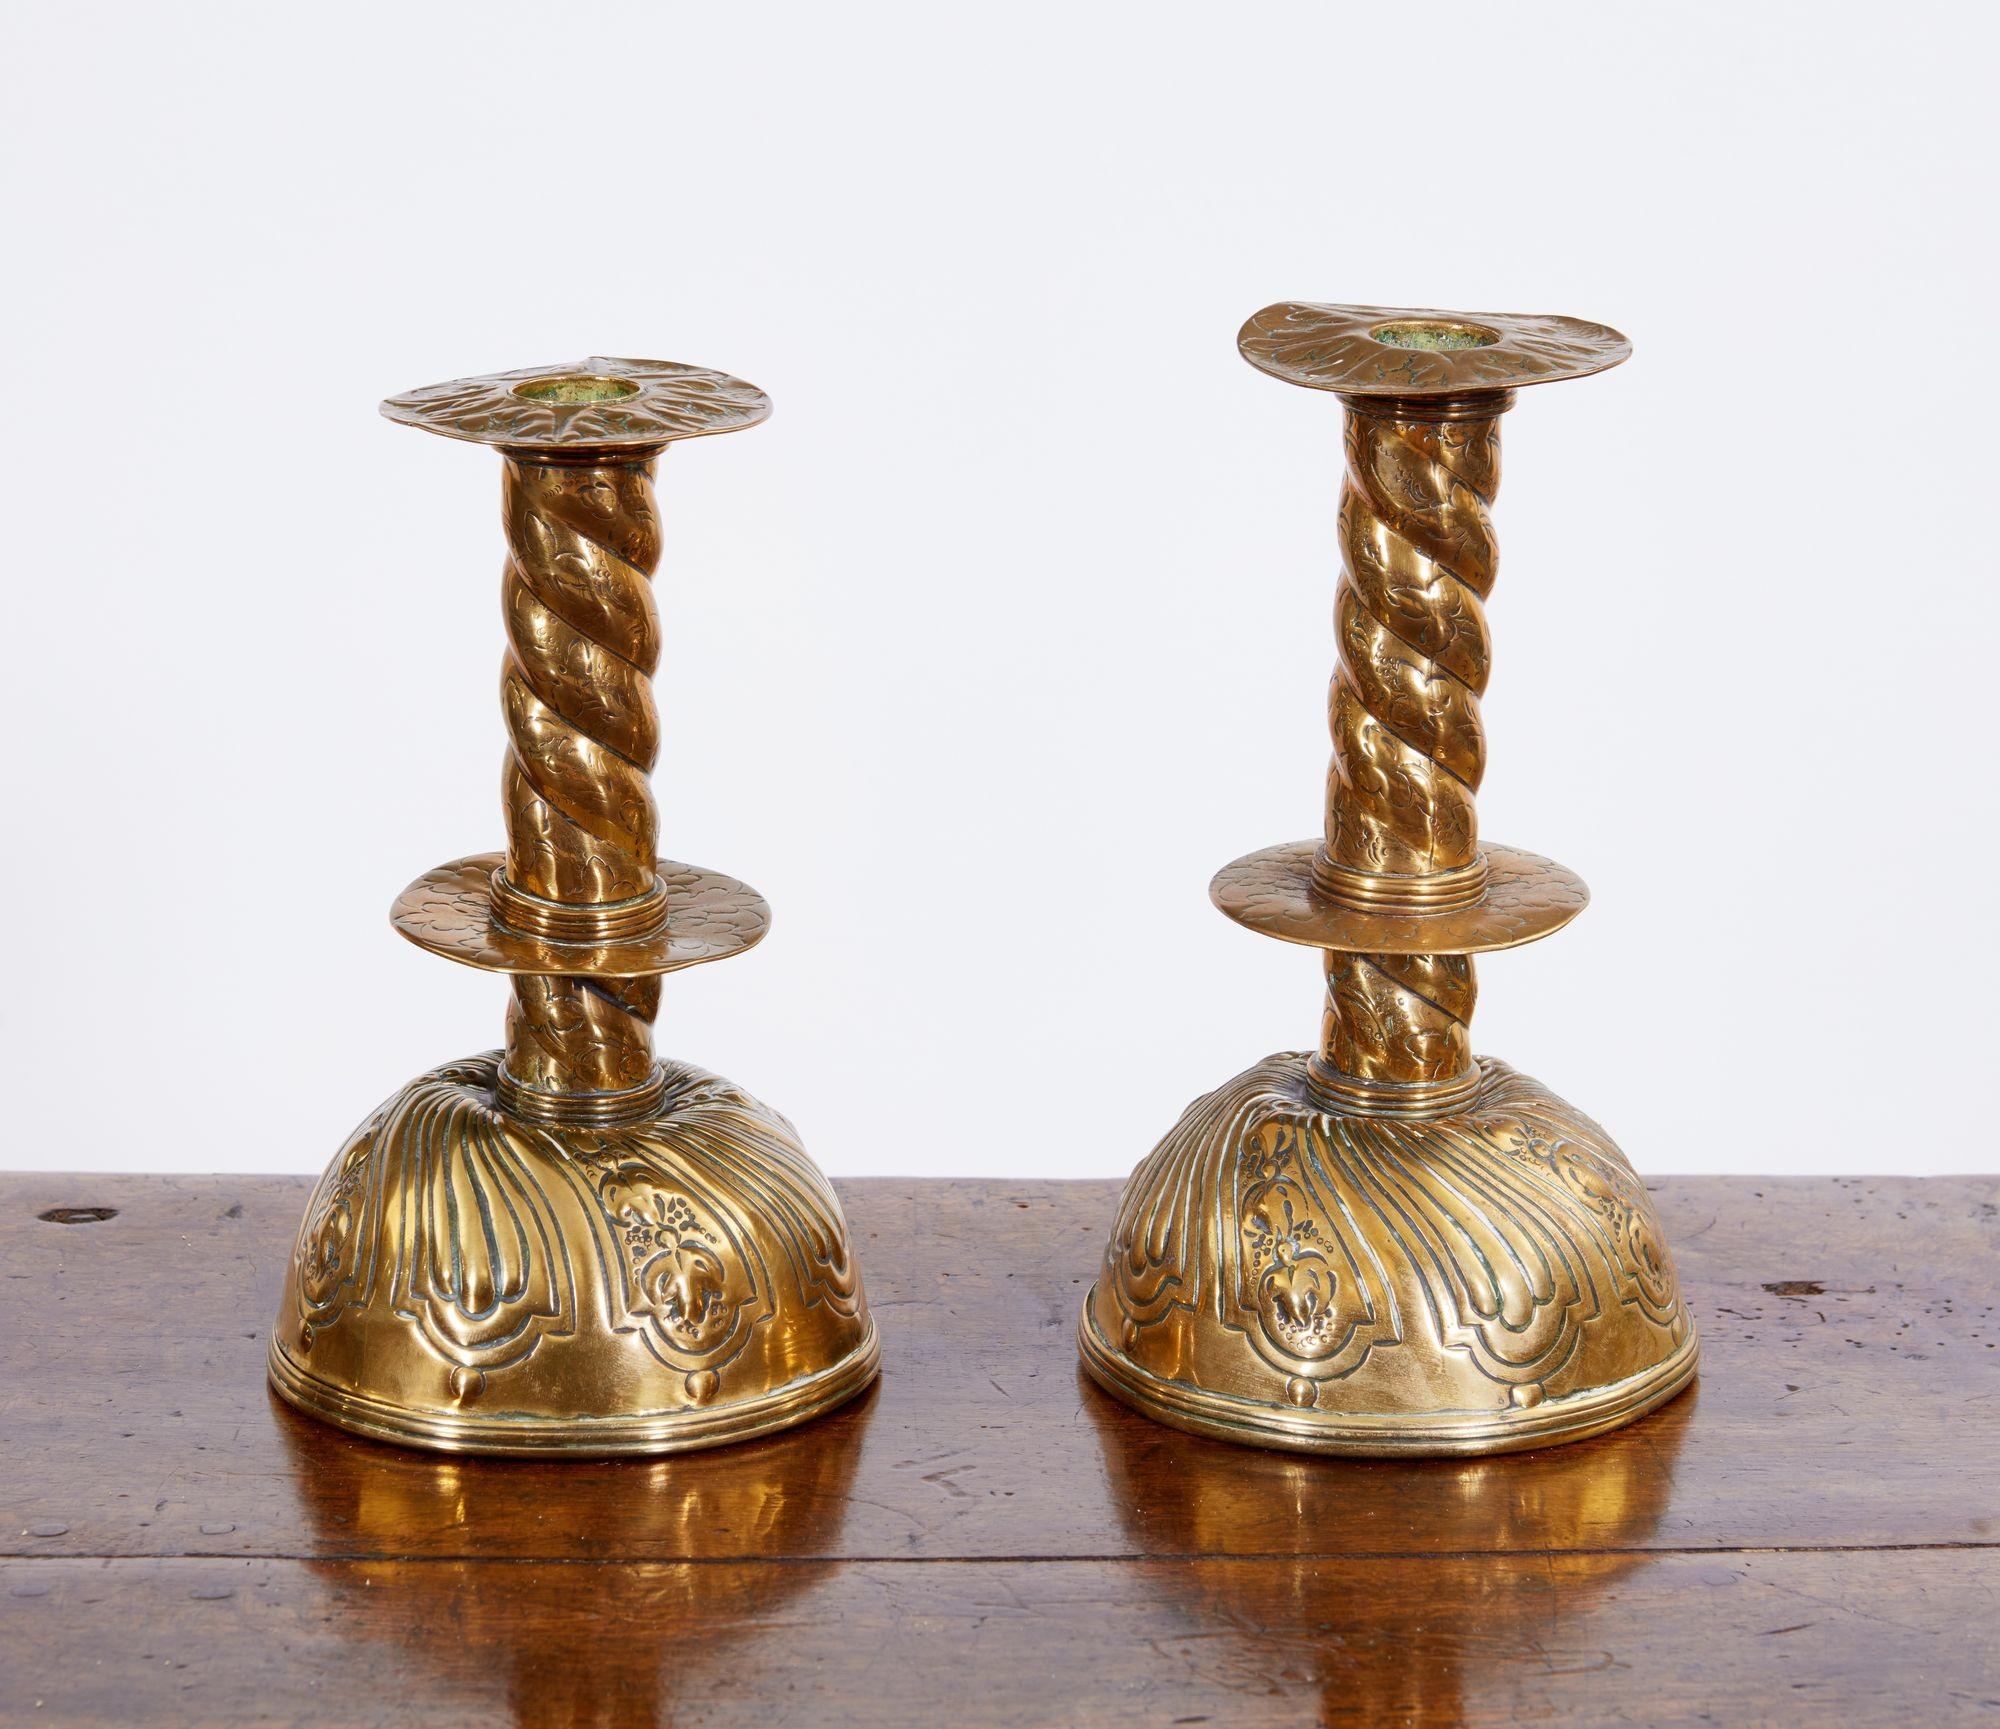 Good pair of 18th Century Swedish baroque hand hammered brass candlesticks with removable drip pan over barleytwist shafts with central drip collar, standing on bulbous bases having spiral floral decoration.